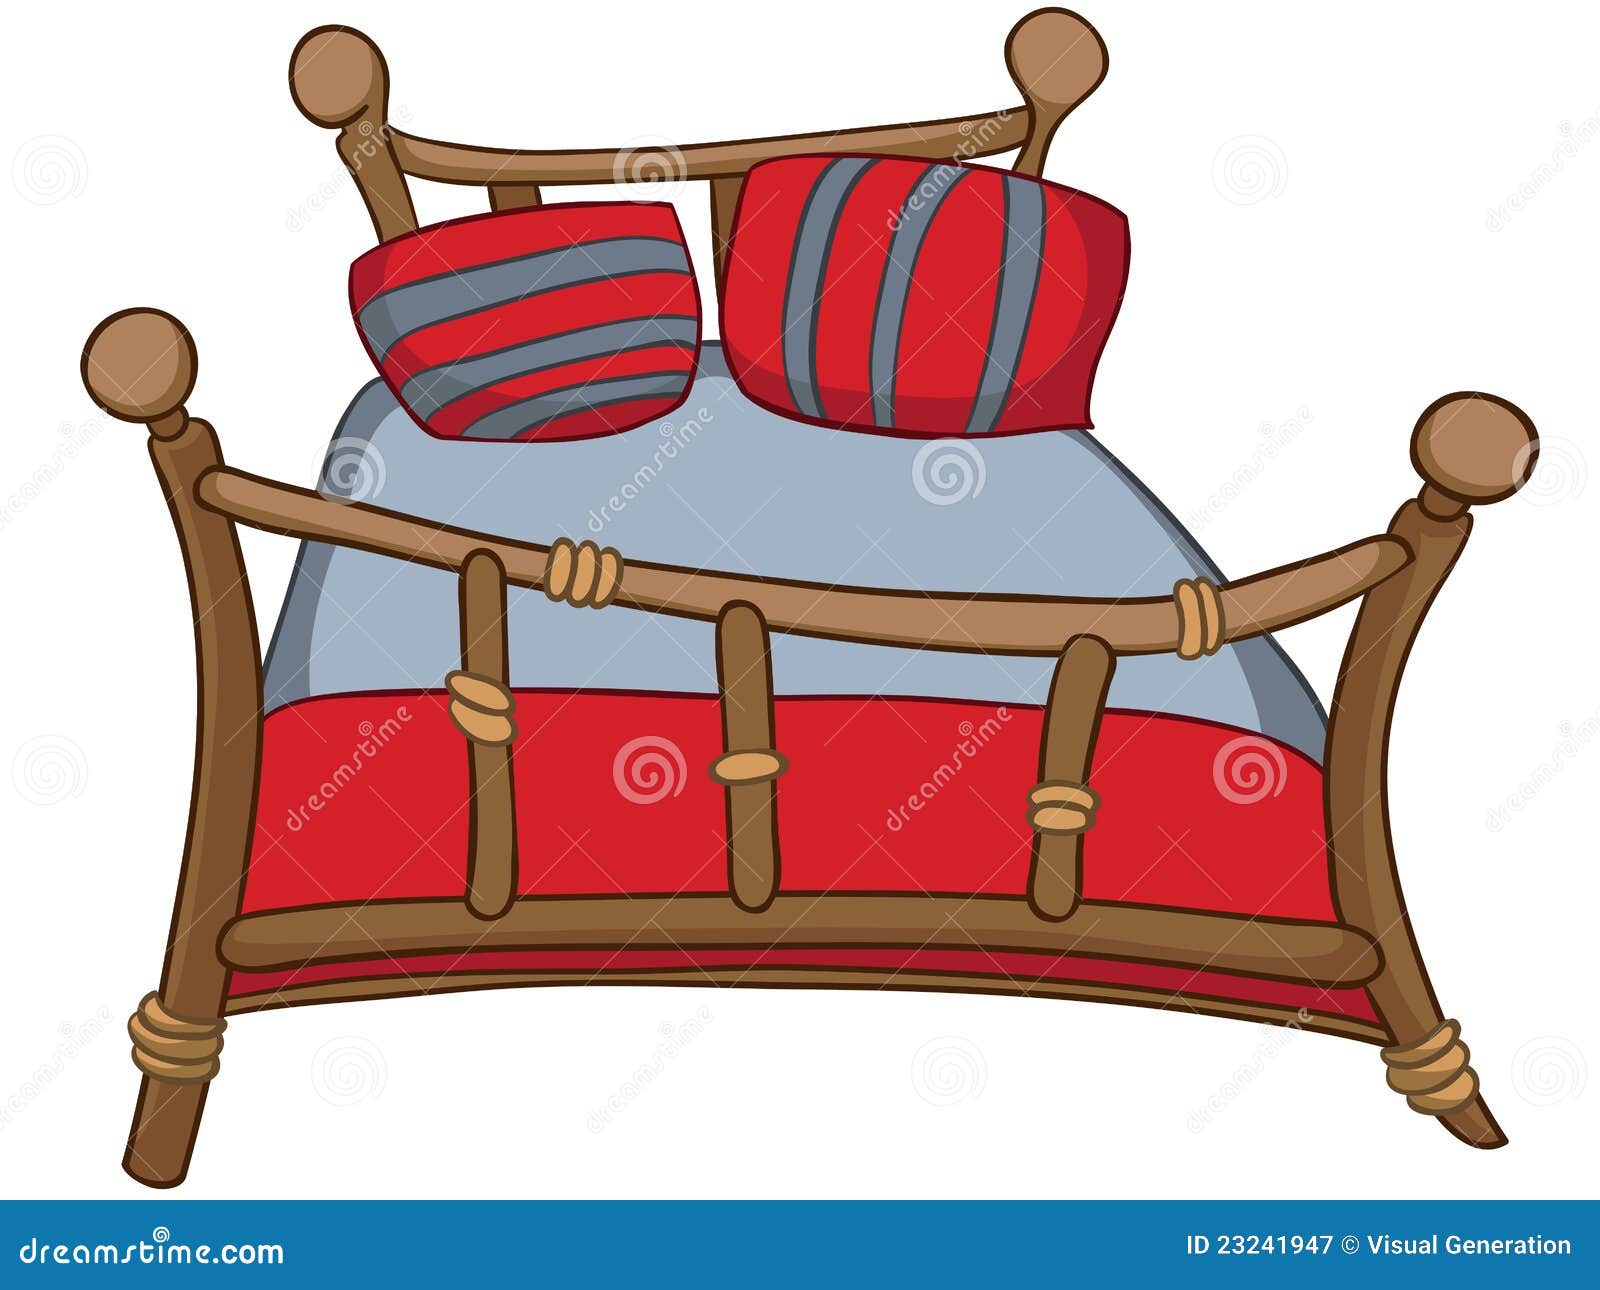 Cartoon Home Furniture Bed Royalty Free Stock Photography - Image ...